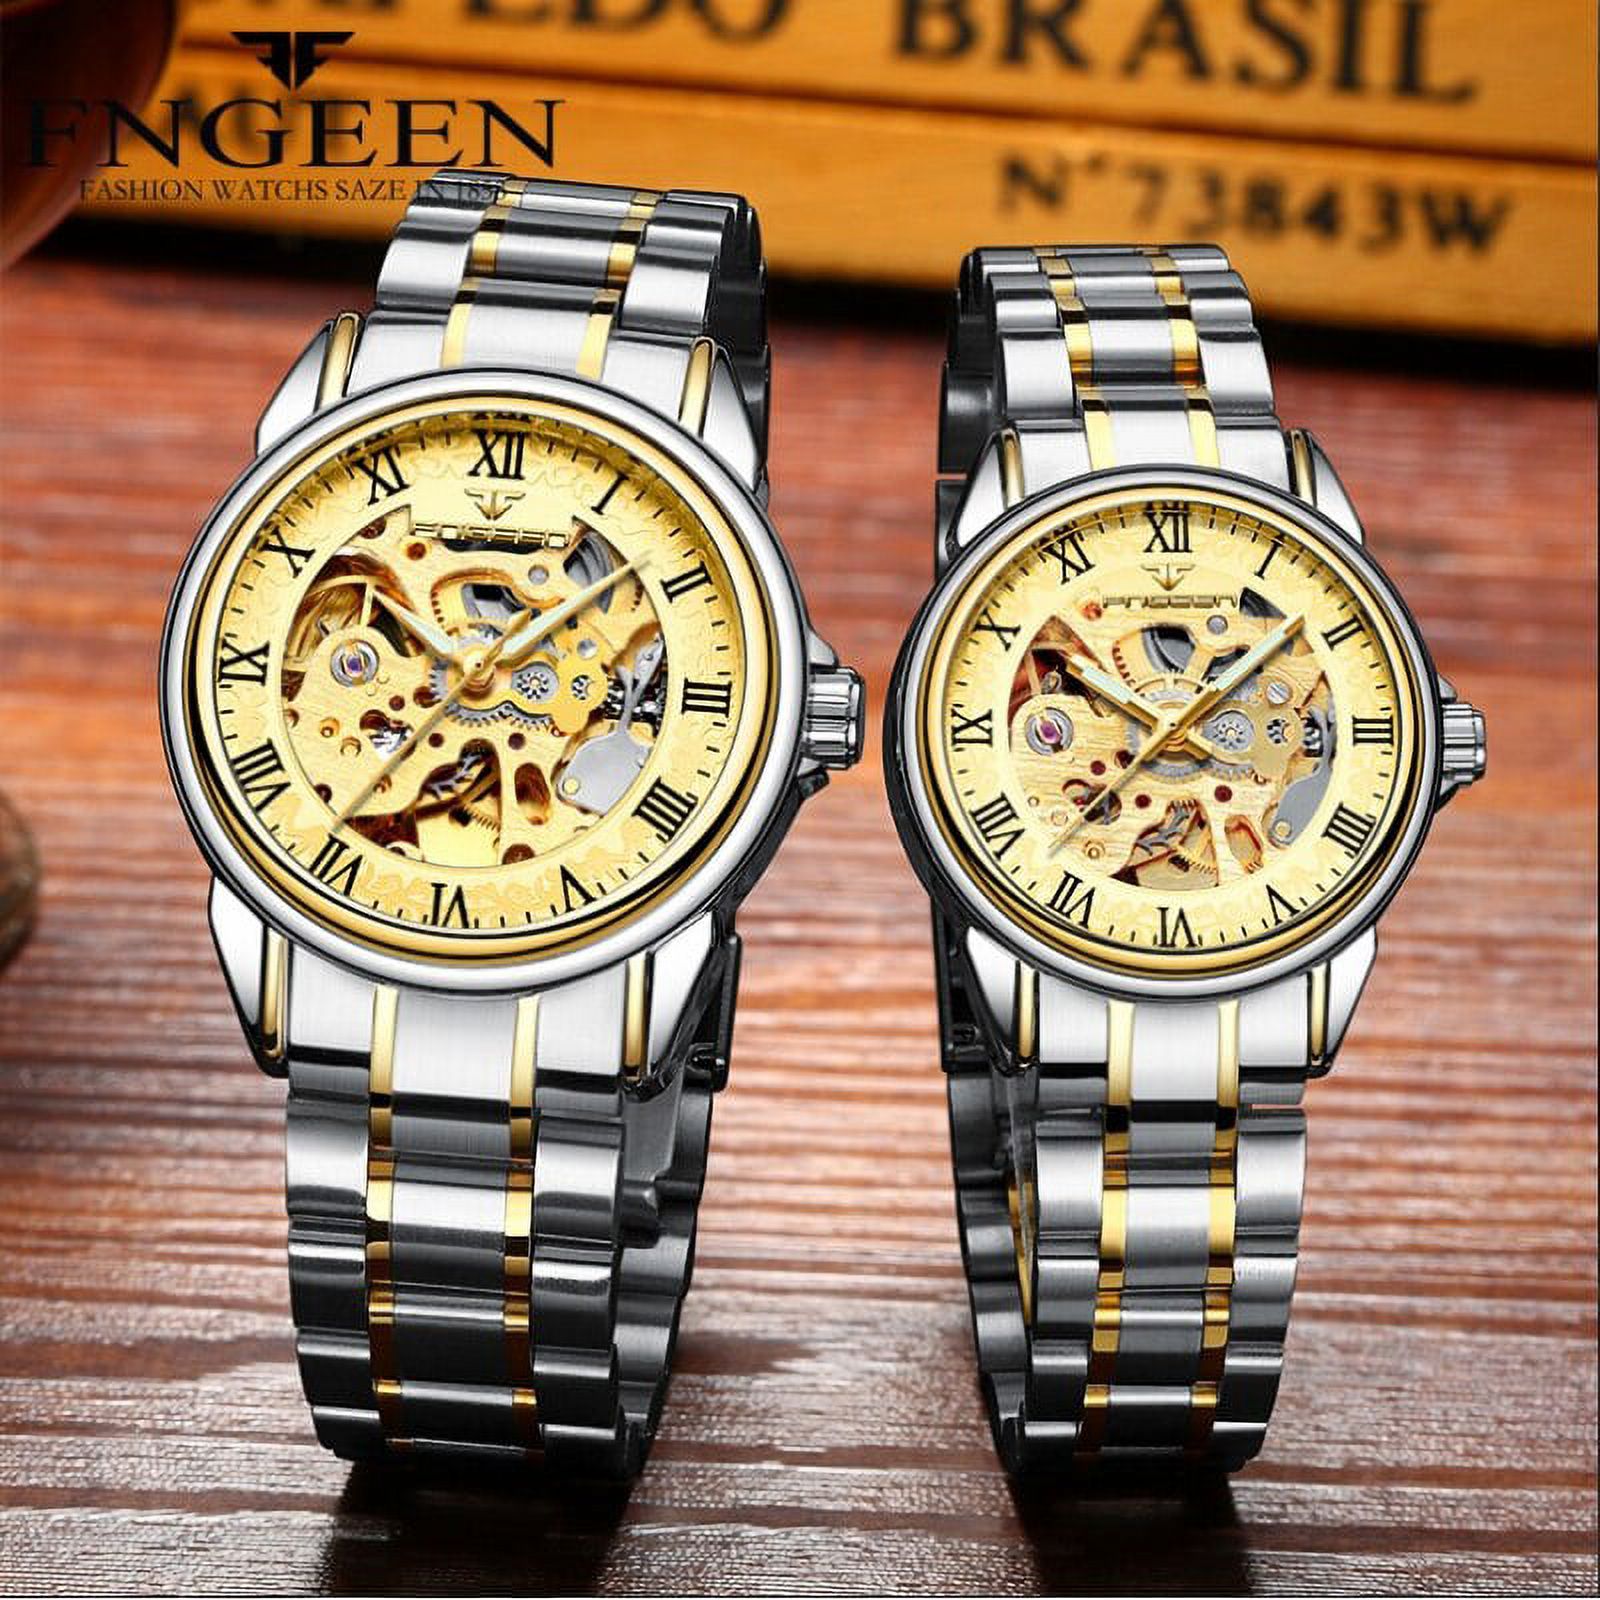 Fngeen Brand Men's Watch Waterproof Fashion Student Men's Watch Double-Sided Hollow Automatic Mechanical Watch - image 3 of 6